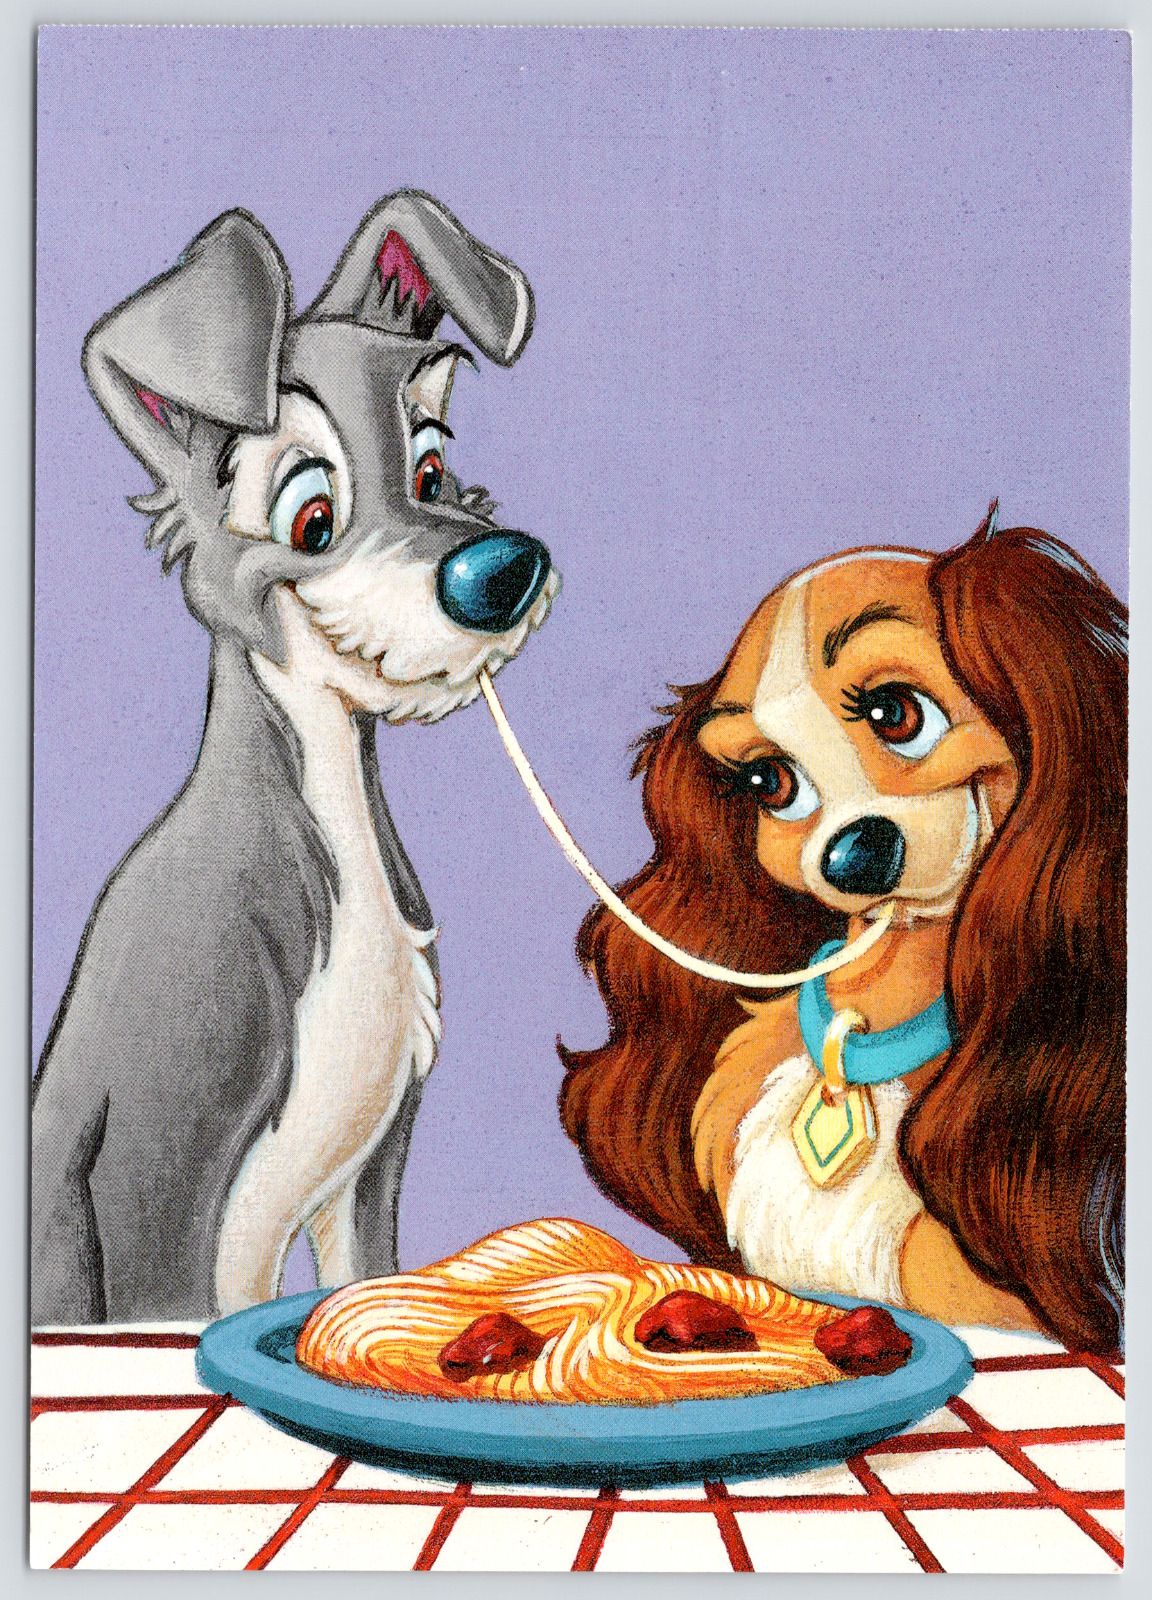 Postcard First Day Issue 04/21/2006 Lady and the Tramp Disney Mint Condition